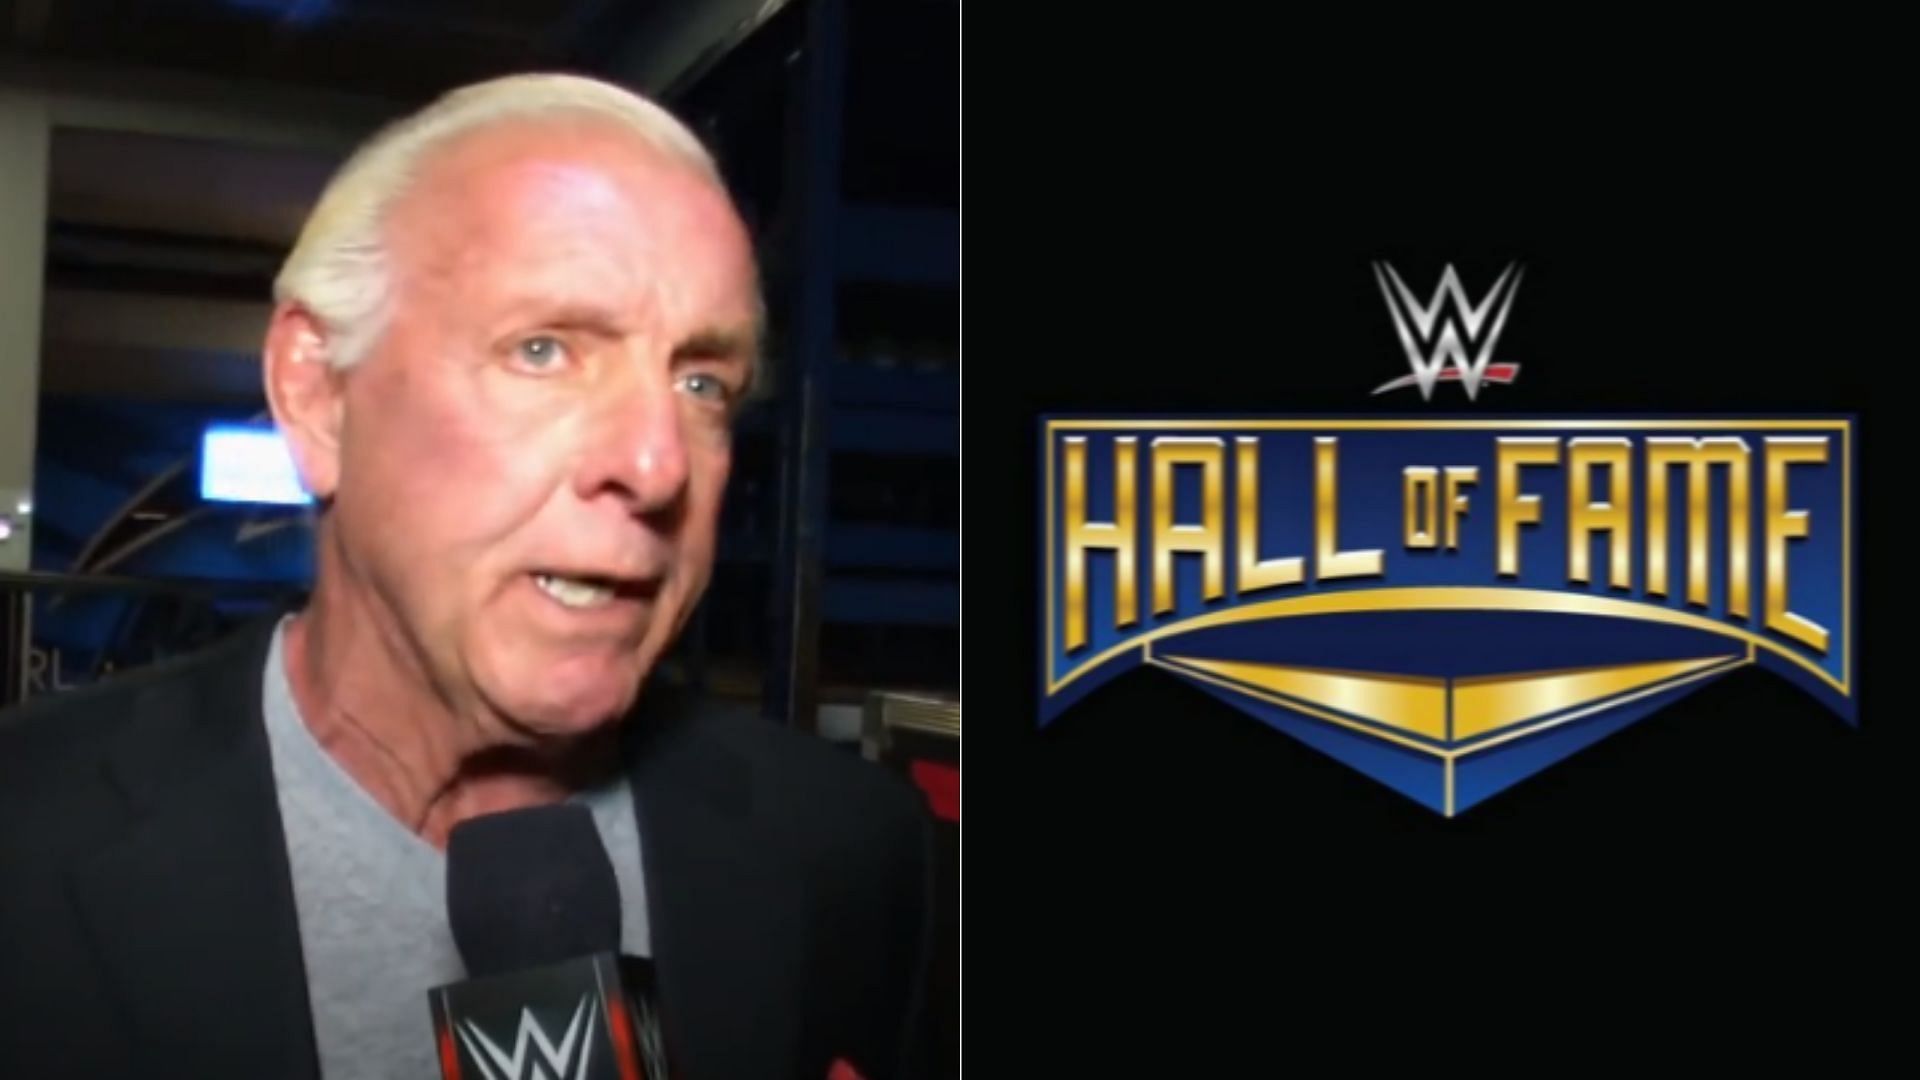 Ric Flair is a two-time WWE Hall of Famer